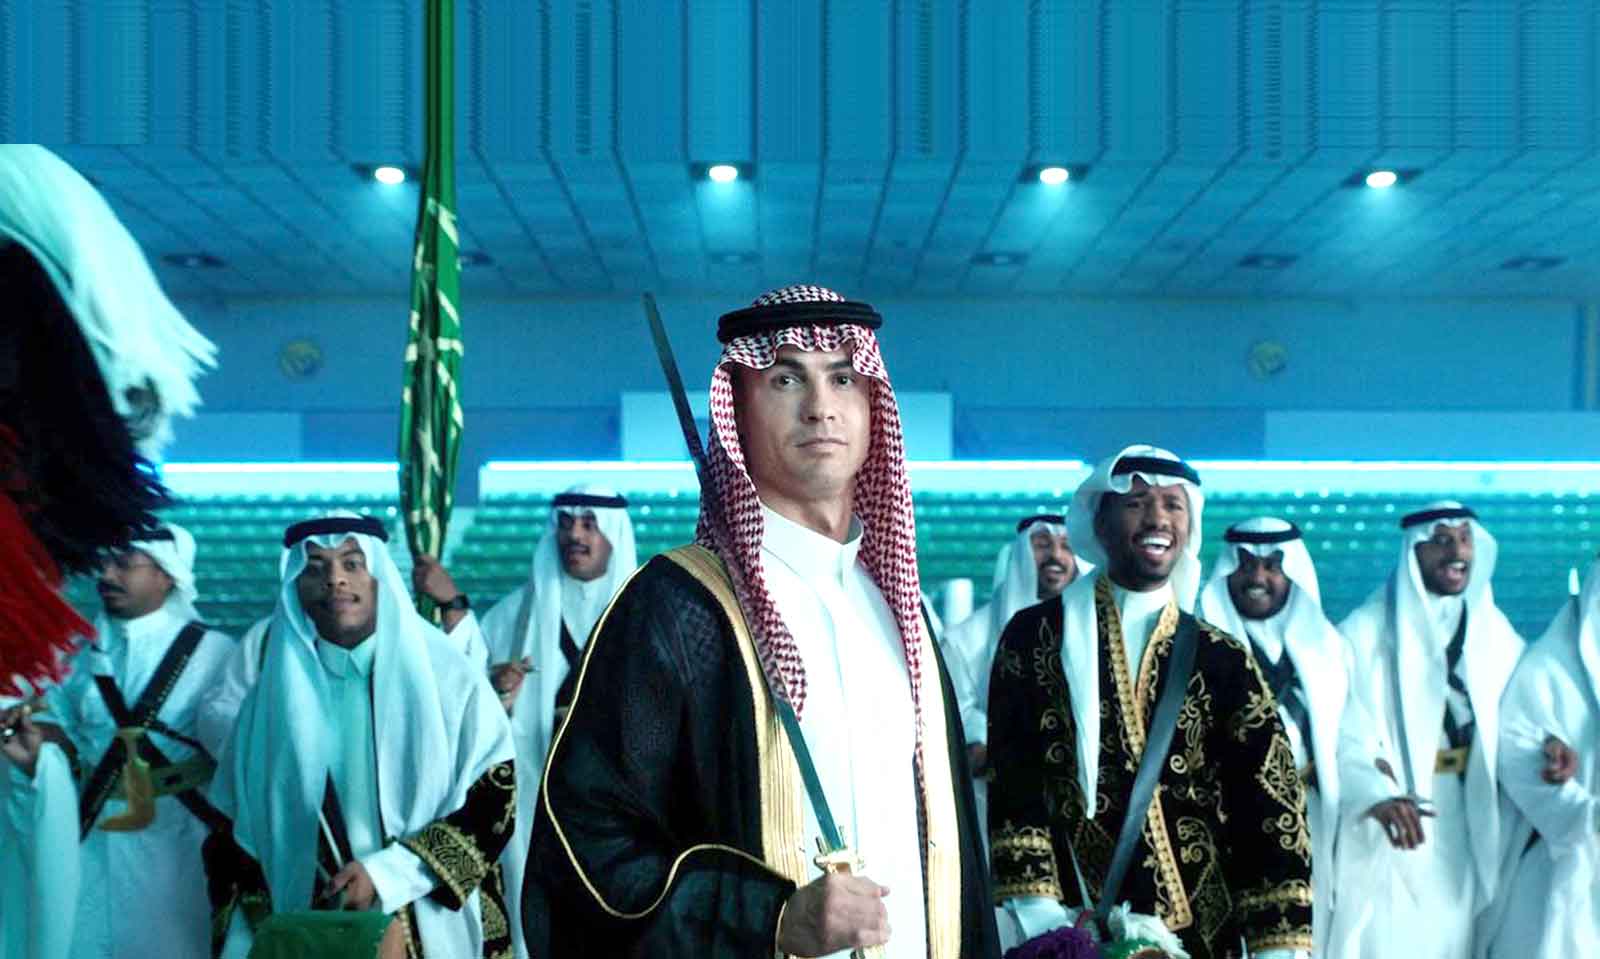 Cristiano Ronaldo and Manes Wear Iconic Bisht Moment on Saudi National Day